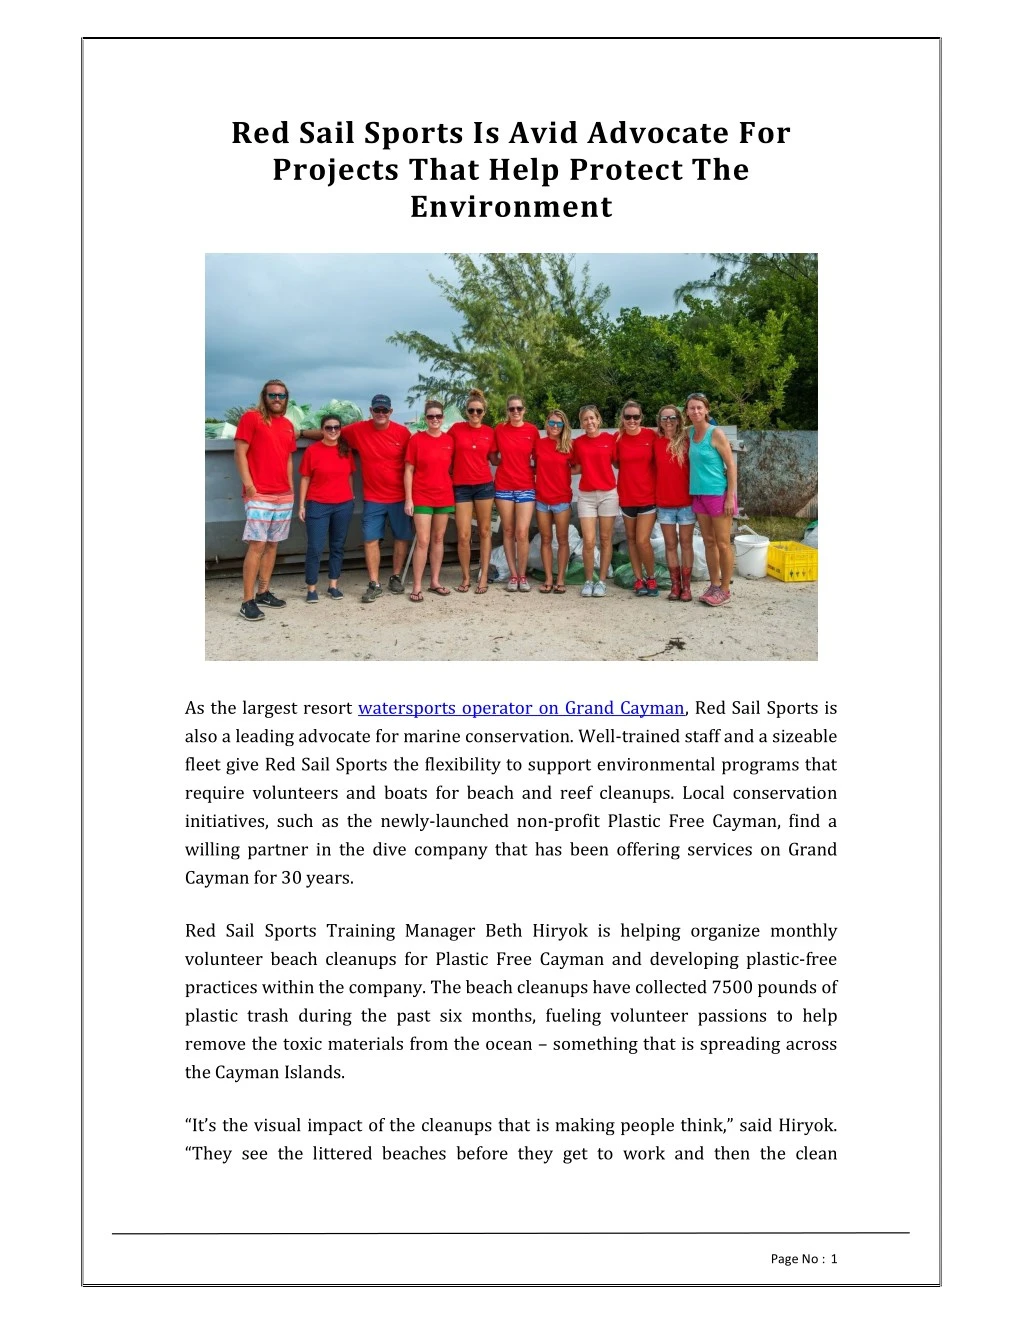 red sail sports is avid advocate for projects